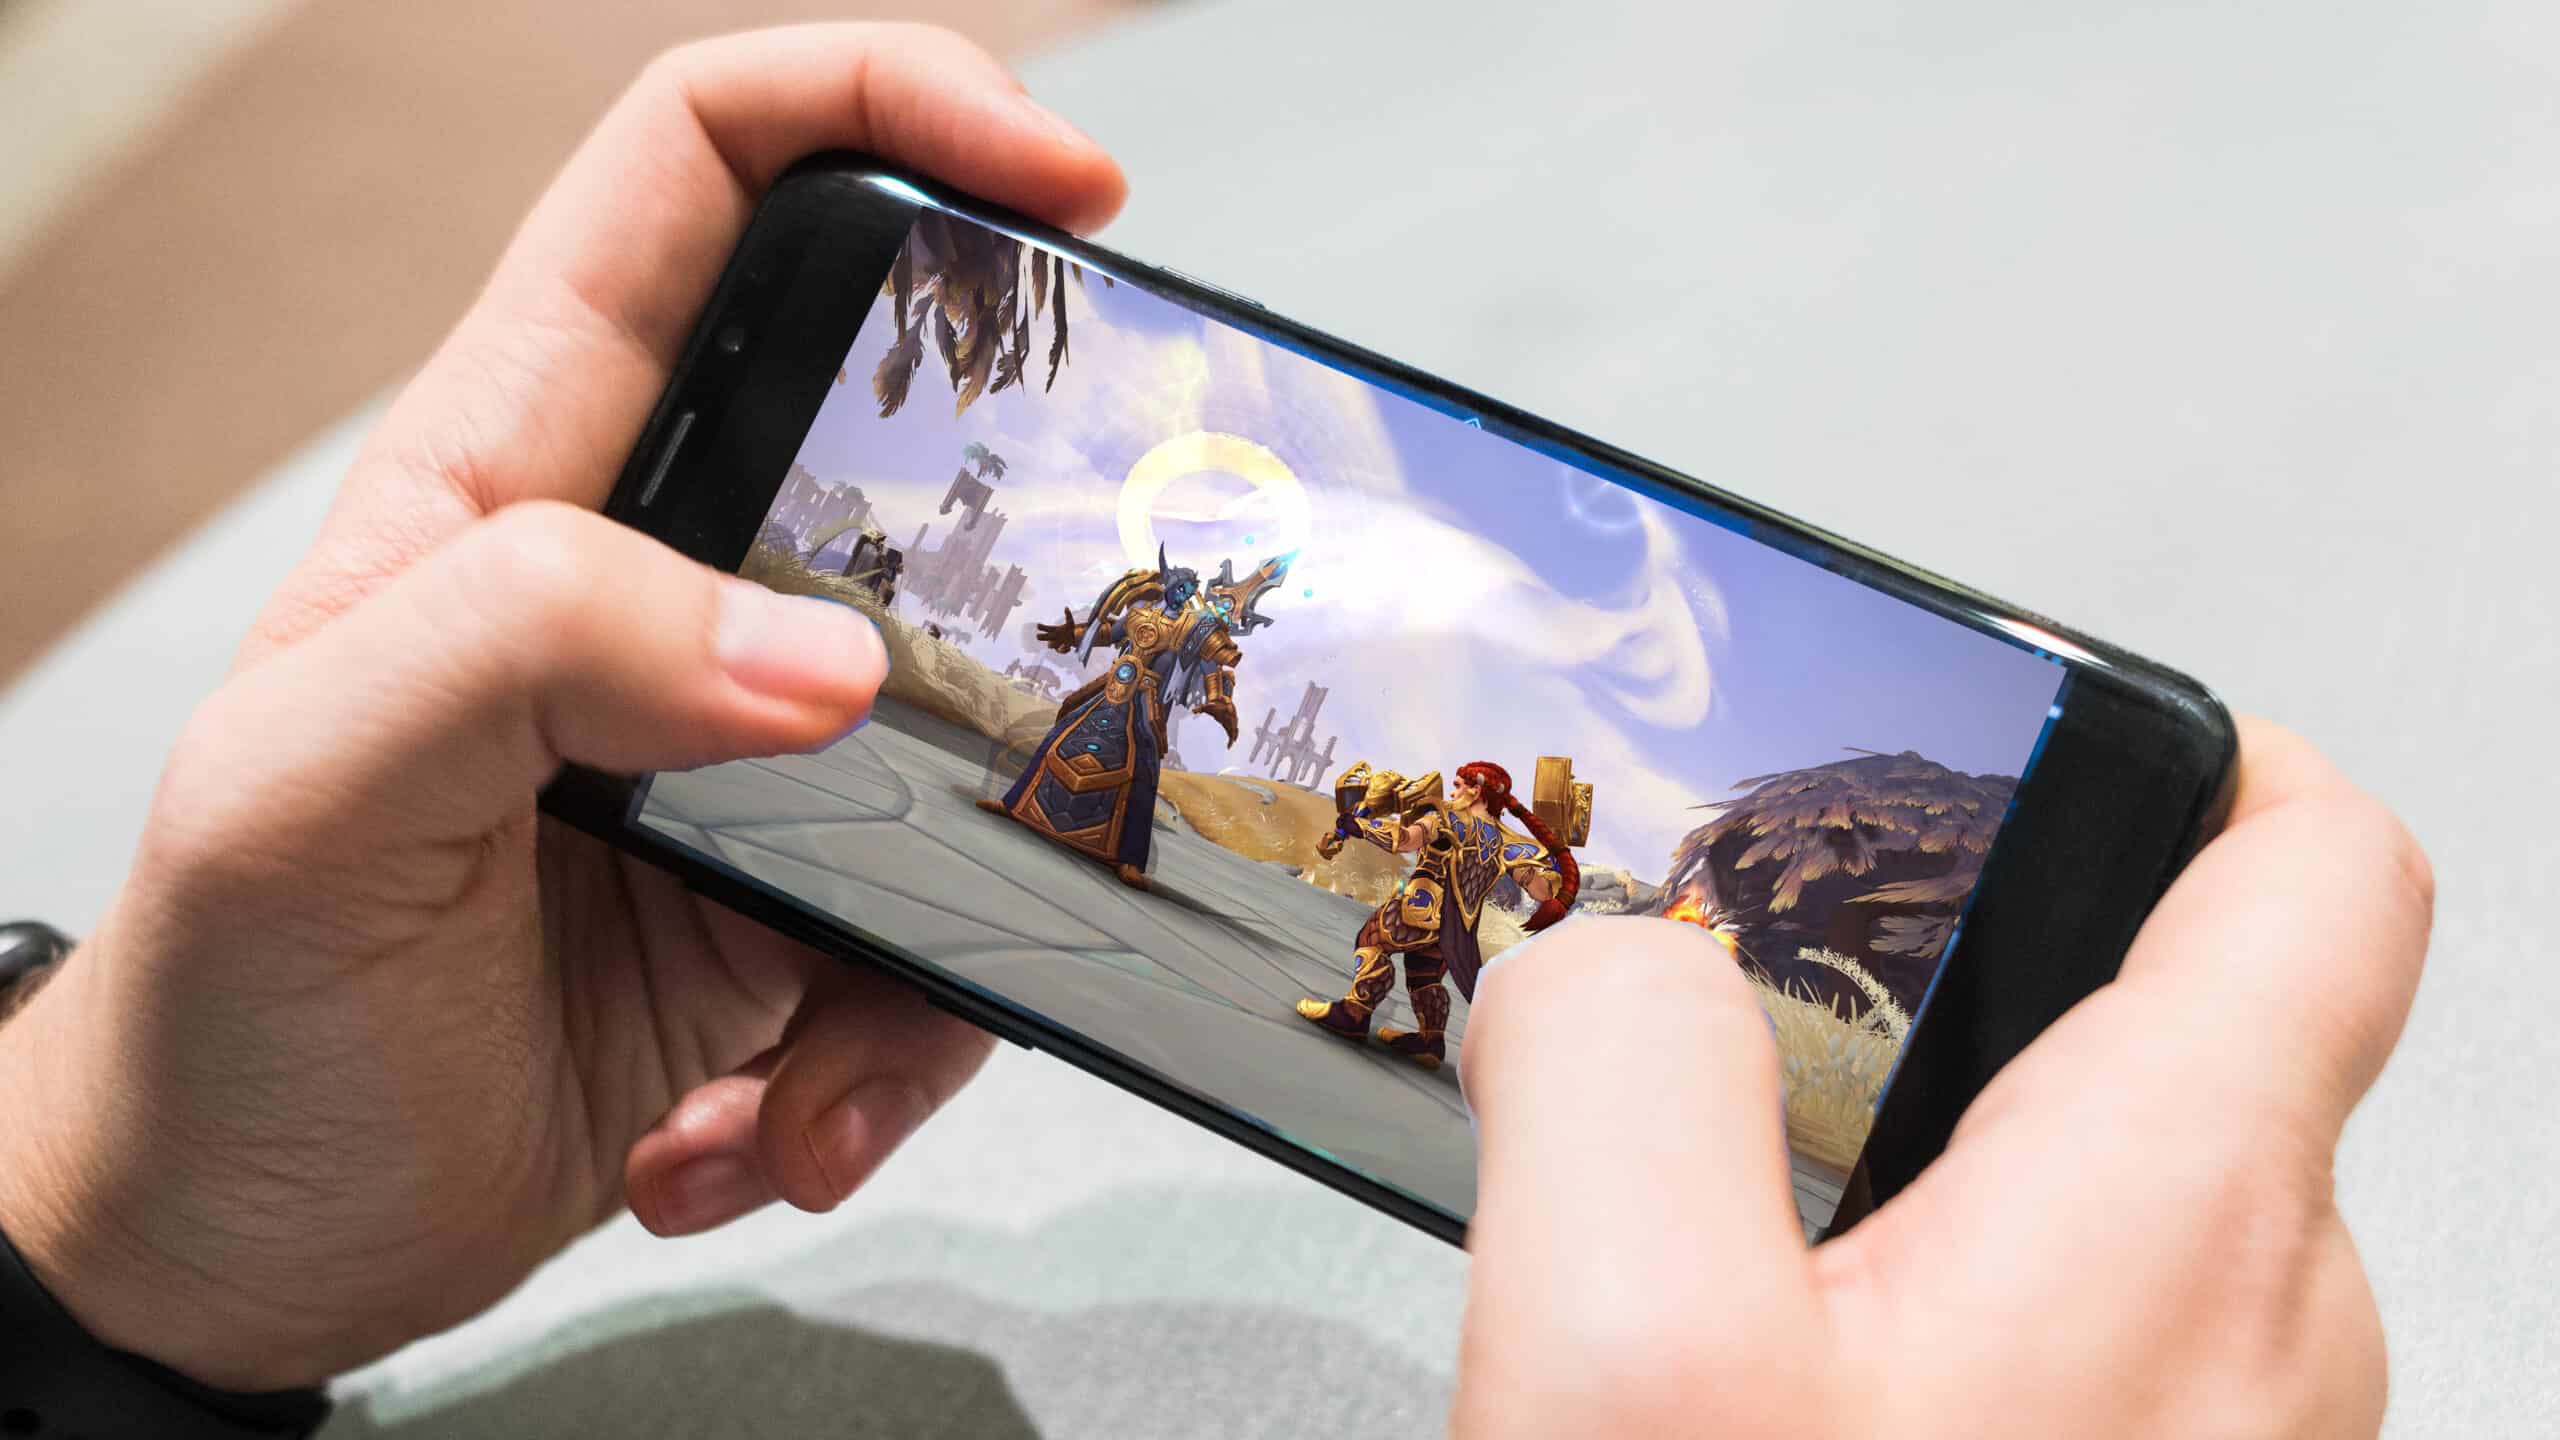 Multiple Warcraft Mobile Games Are In Development According To Blizzard